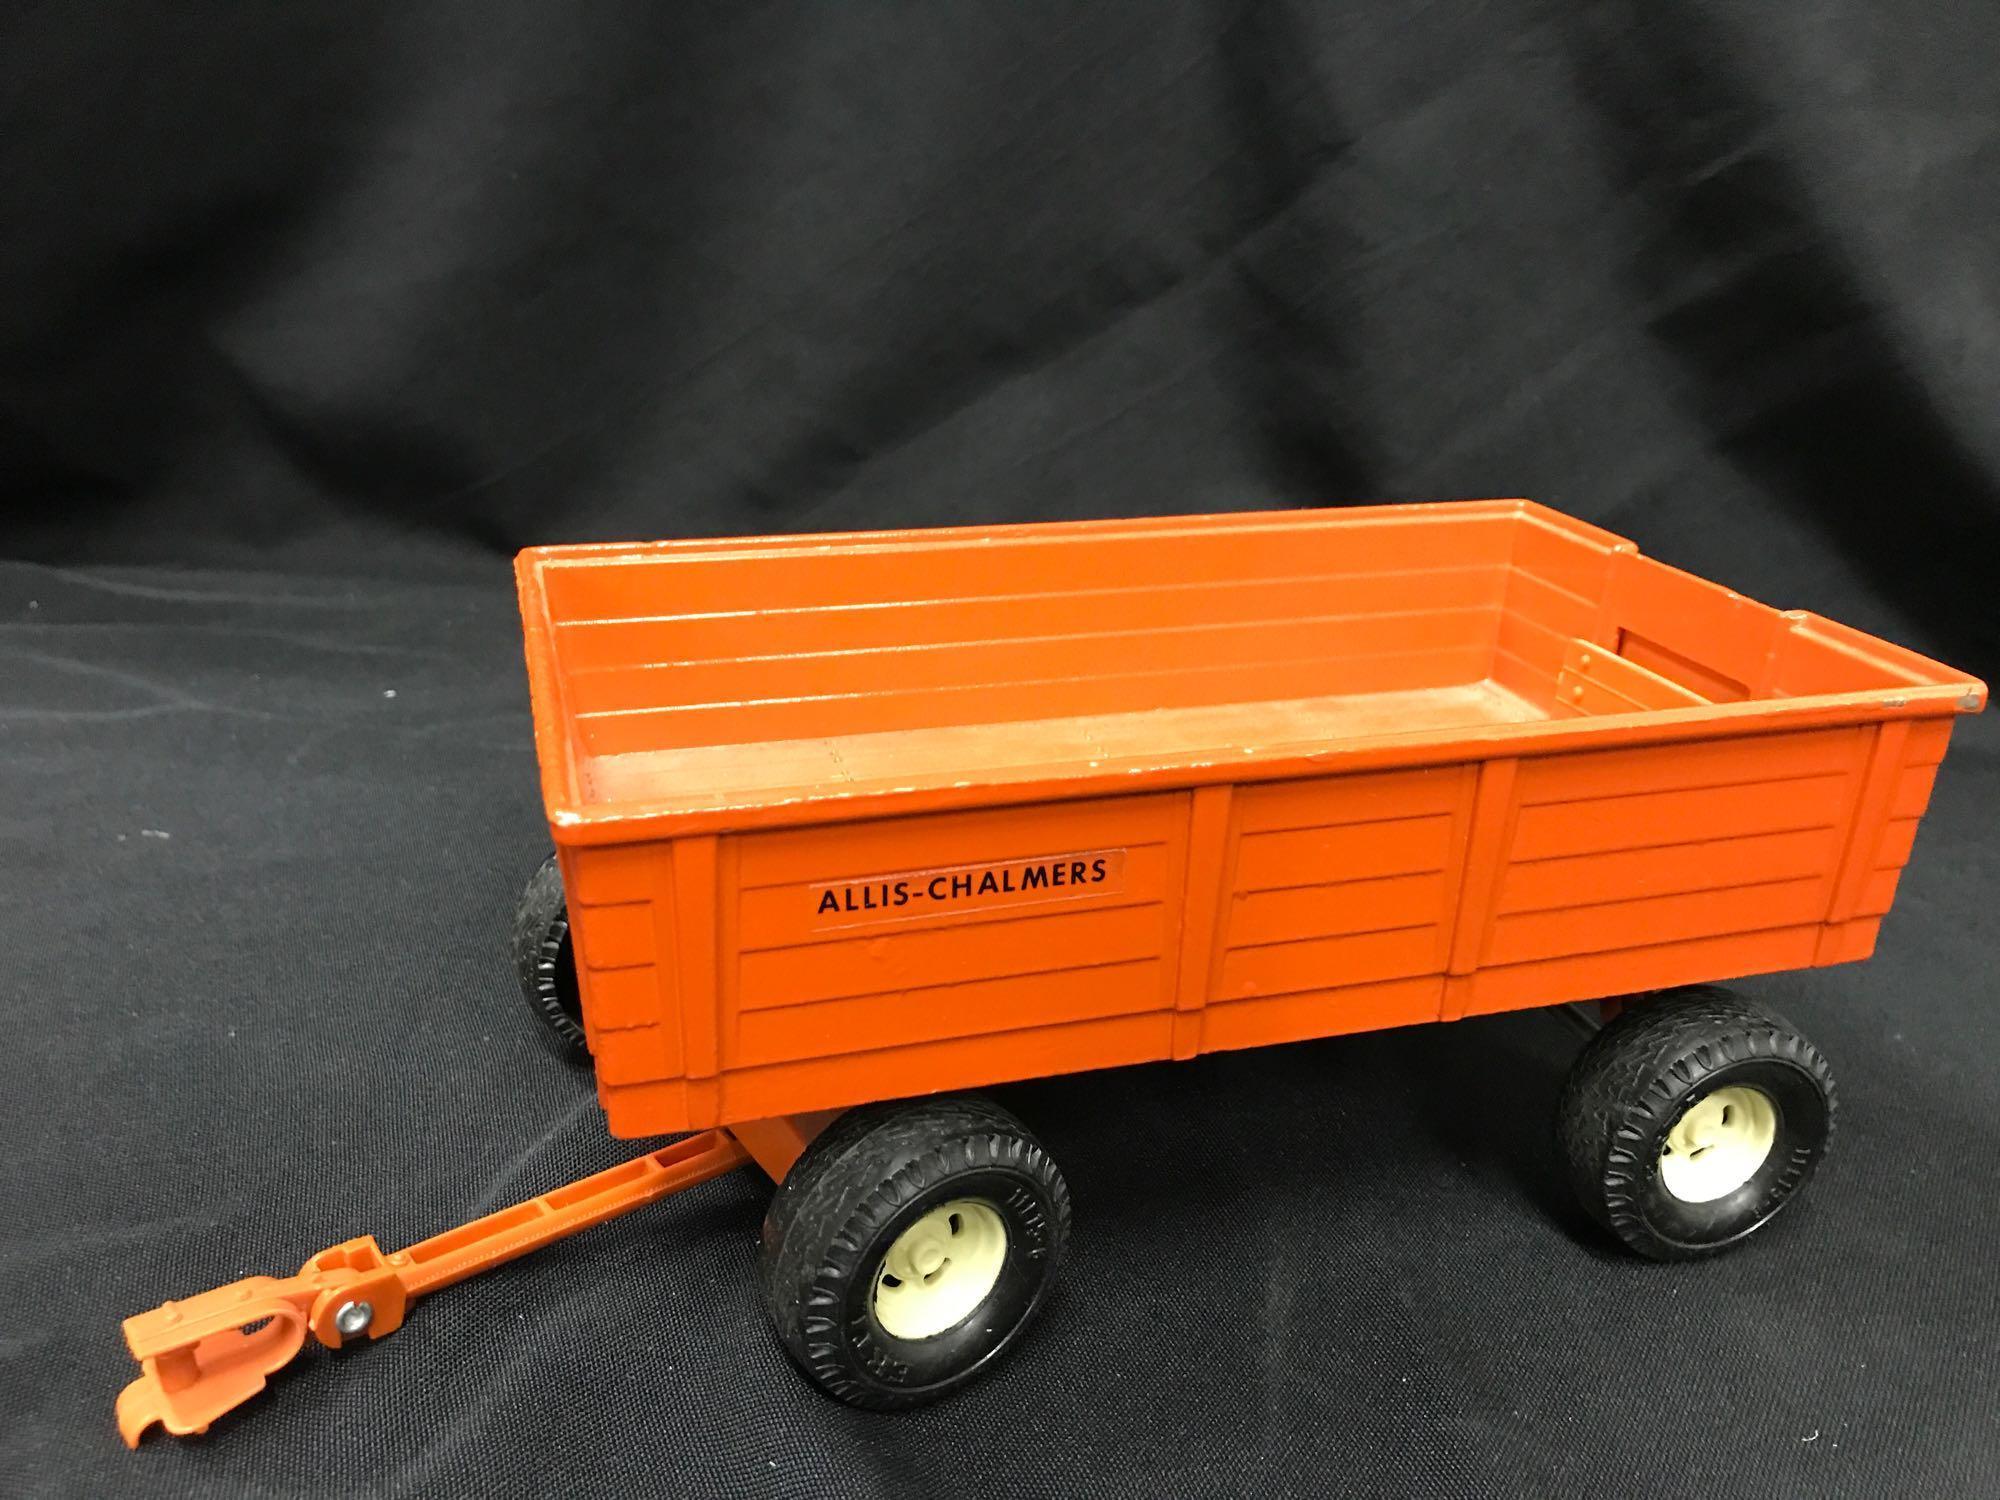 Allis Chalmers "D-17" Tractor and Barge Wagon